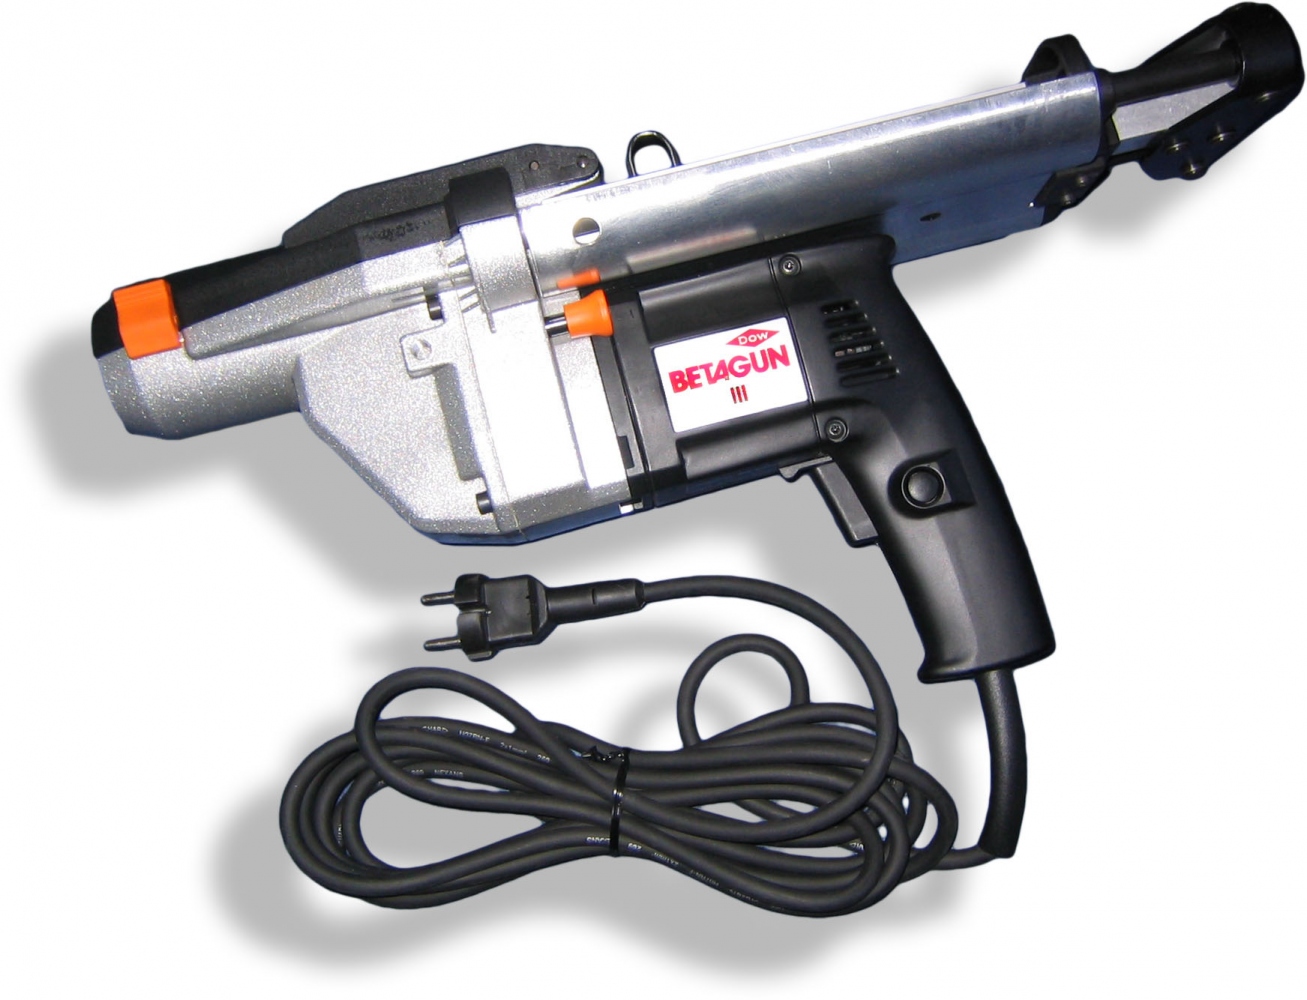 pics/dow-automotive/dow-betagun-3-electric-dispensing-tool-for-double-cartridges.jpg